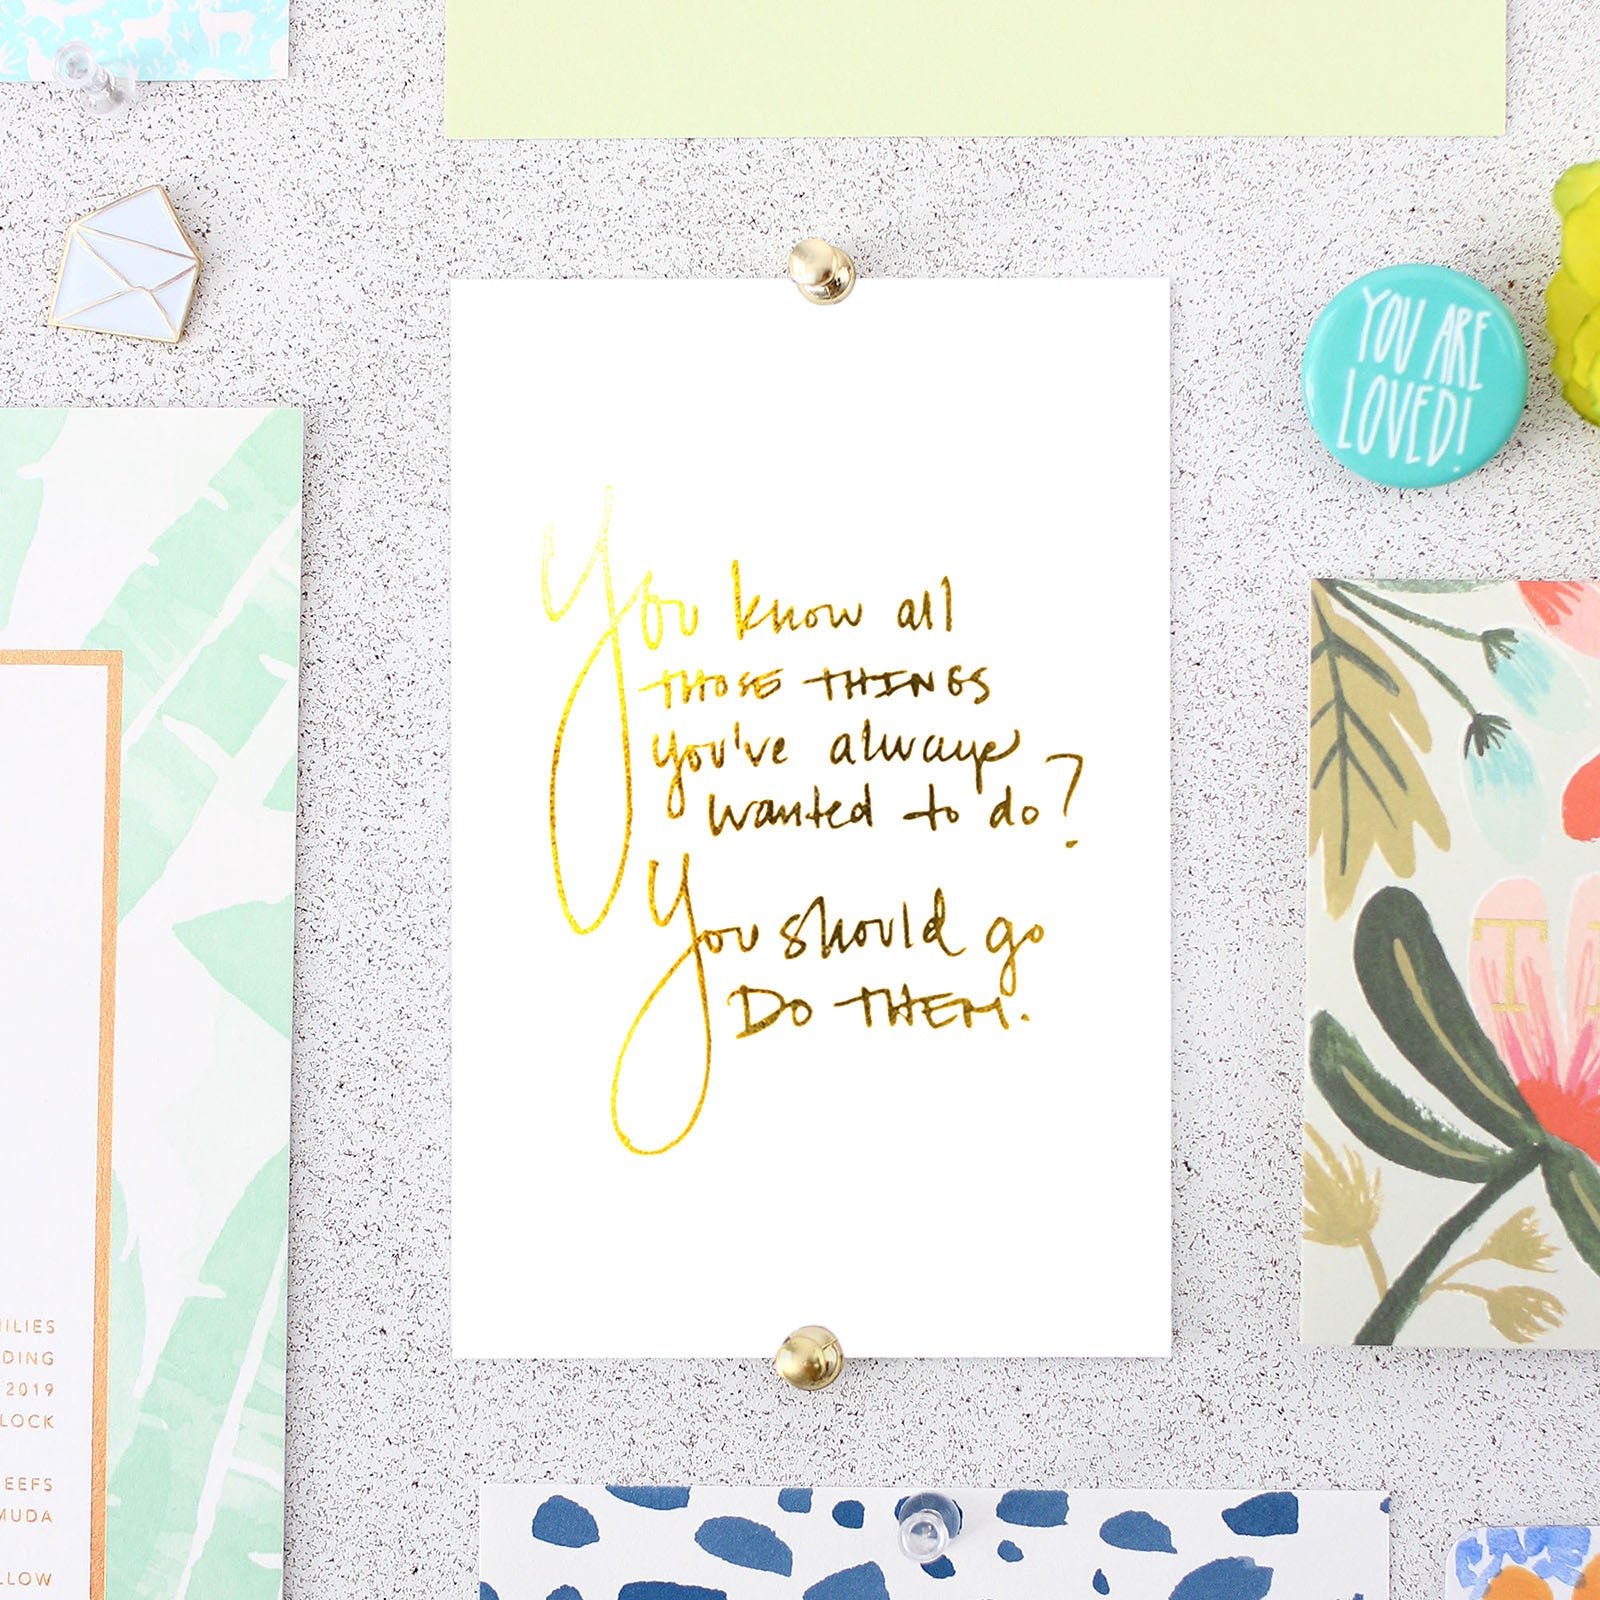 Cultivate What Matters - Art Print - You Know All Those Things - Gold Foil